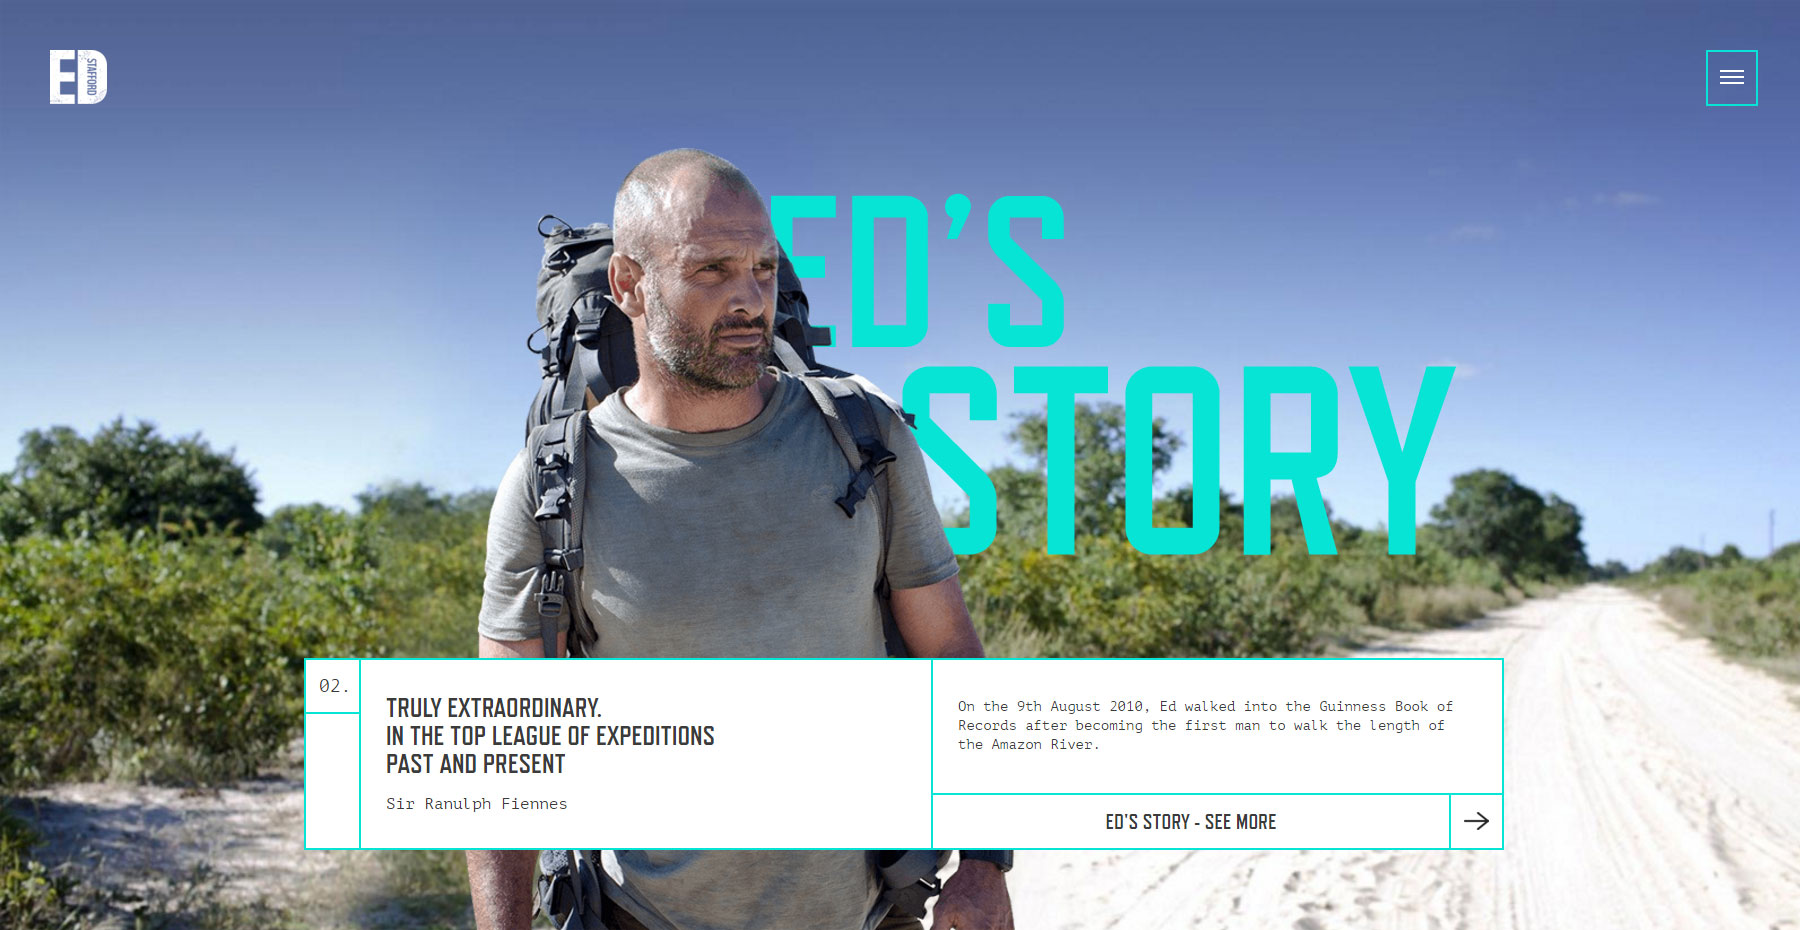 Ed Stafford - Website of the Day